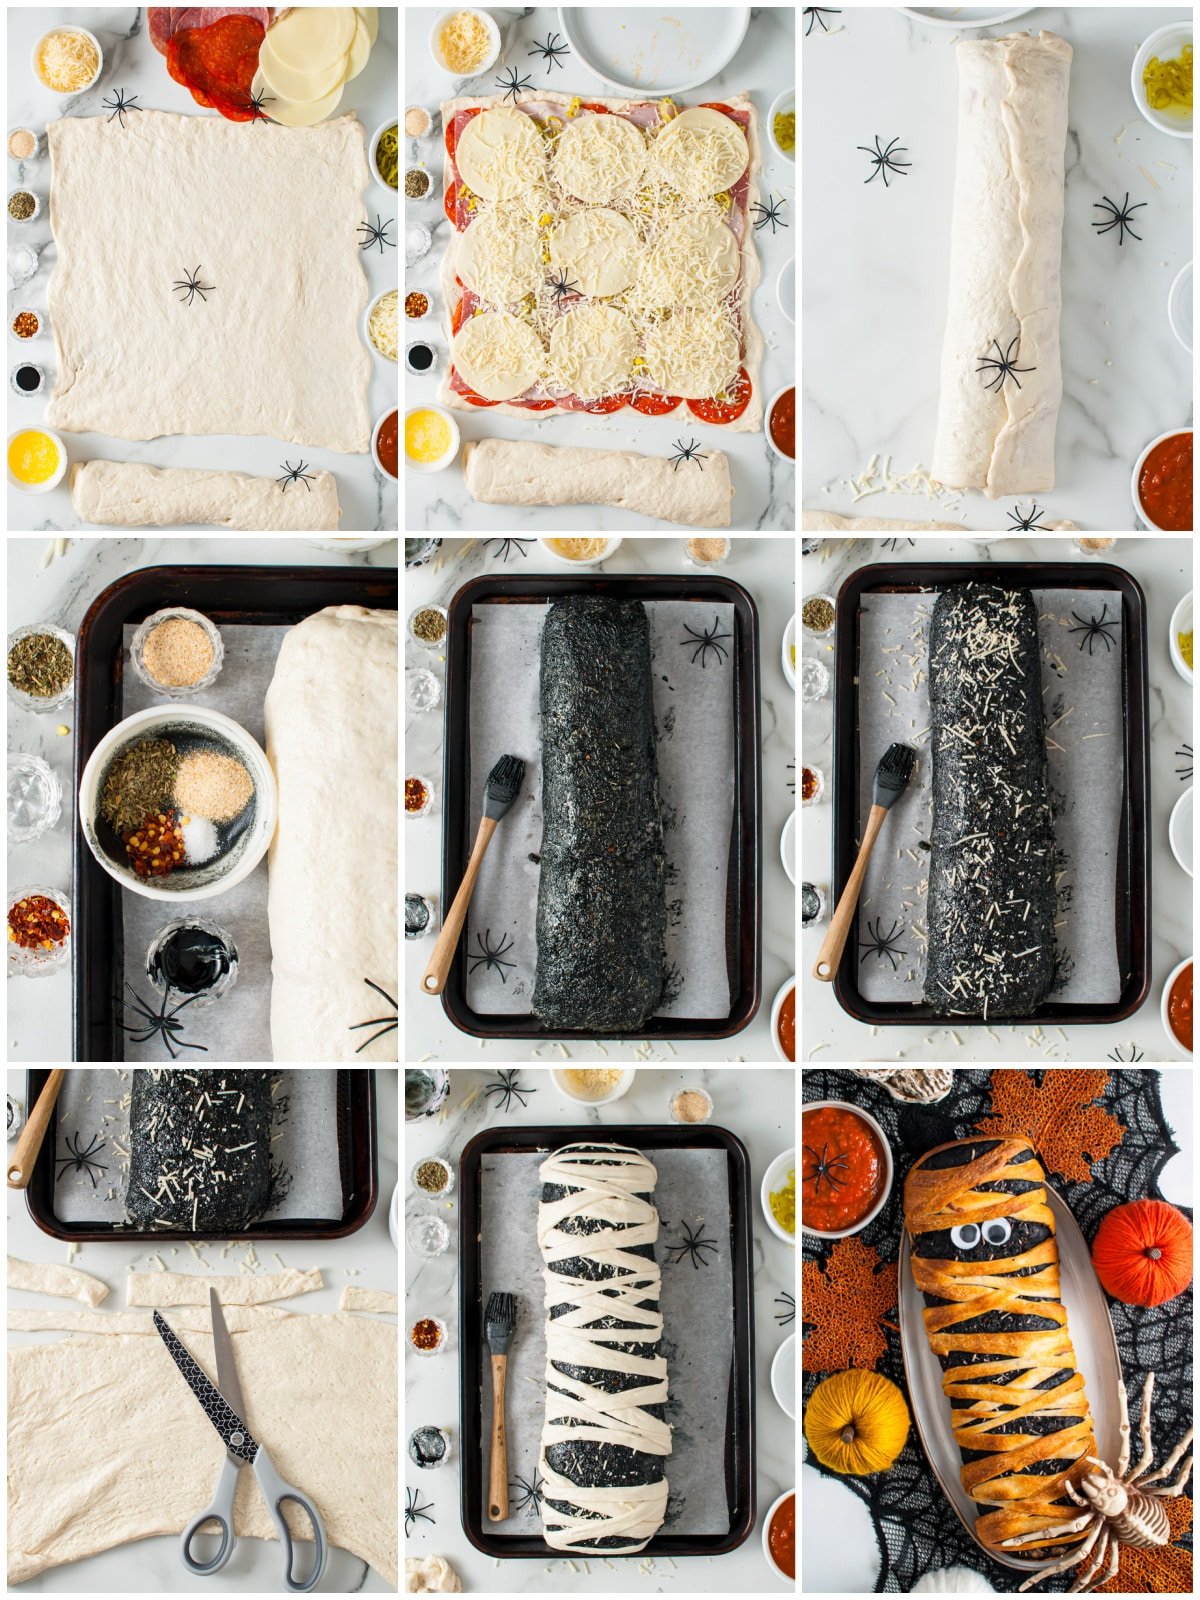 Step by step photos on how to make a Mummy Stromboli.